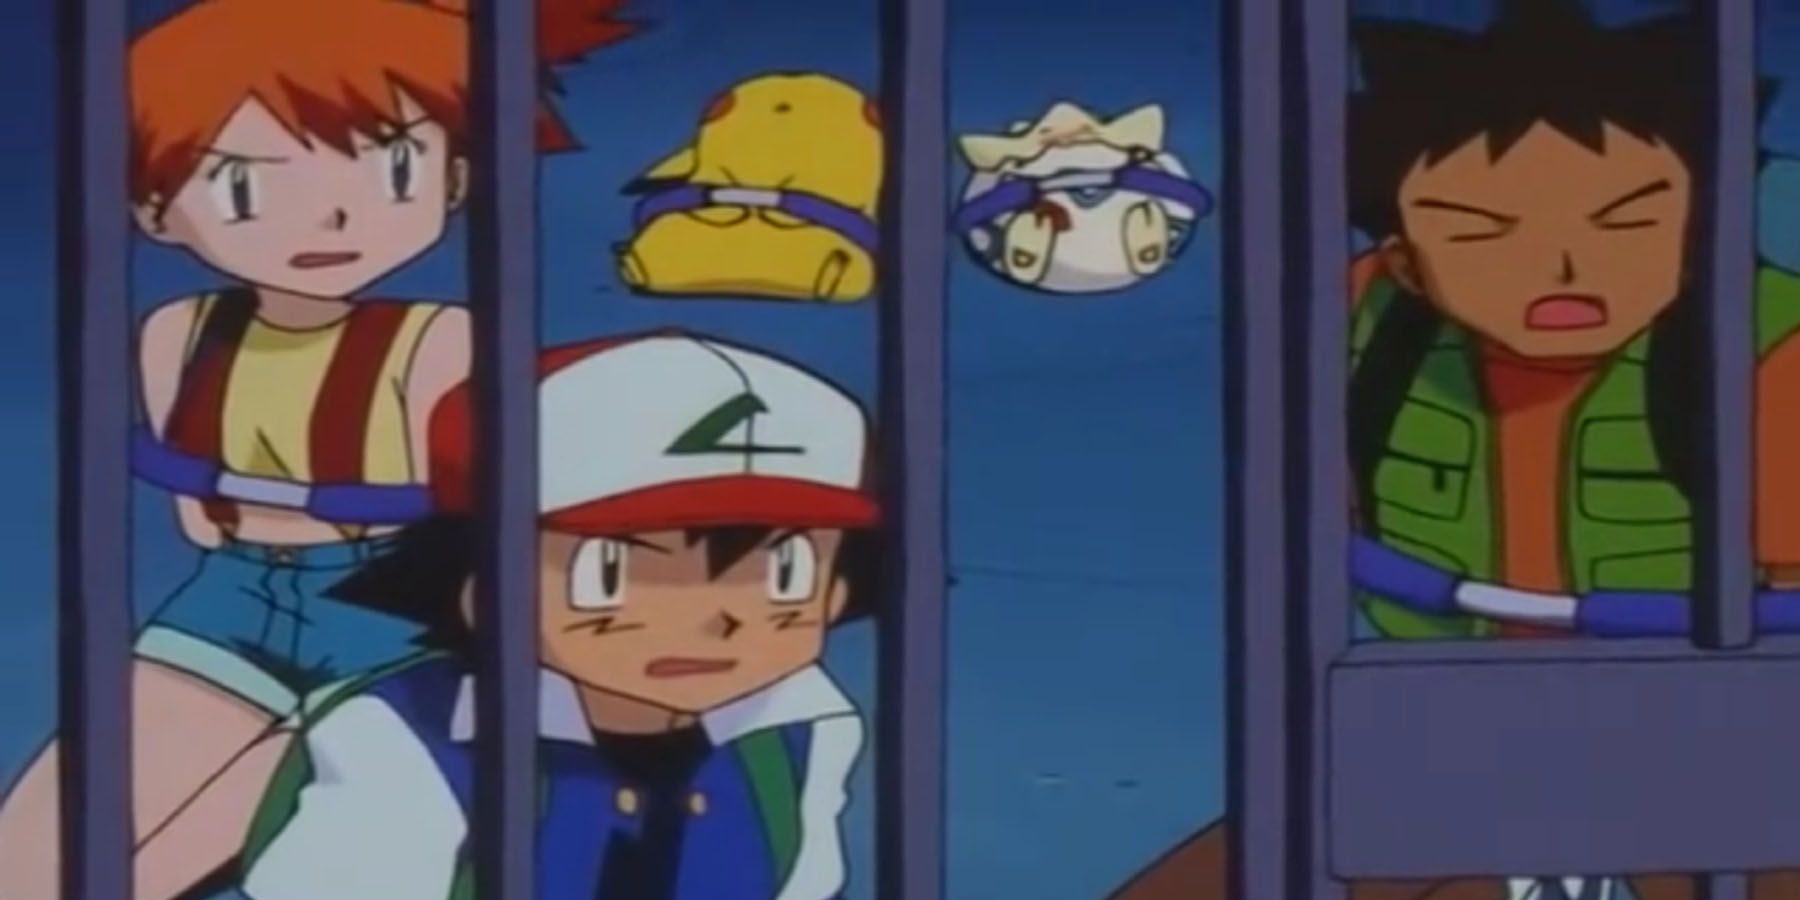 A screenshot of Ash and his friends being locked in prison in the Pokemon anime.